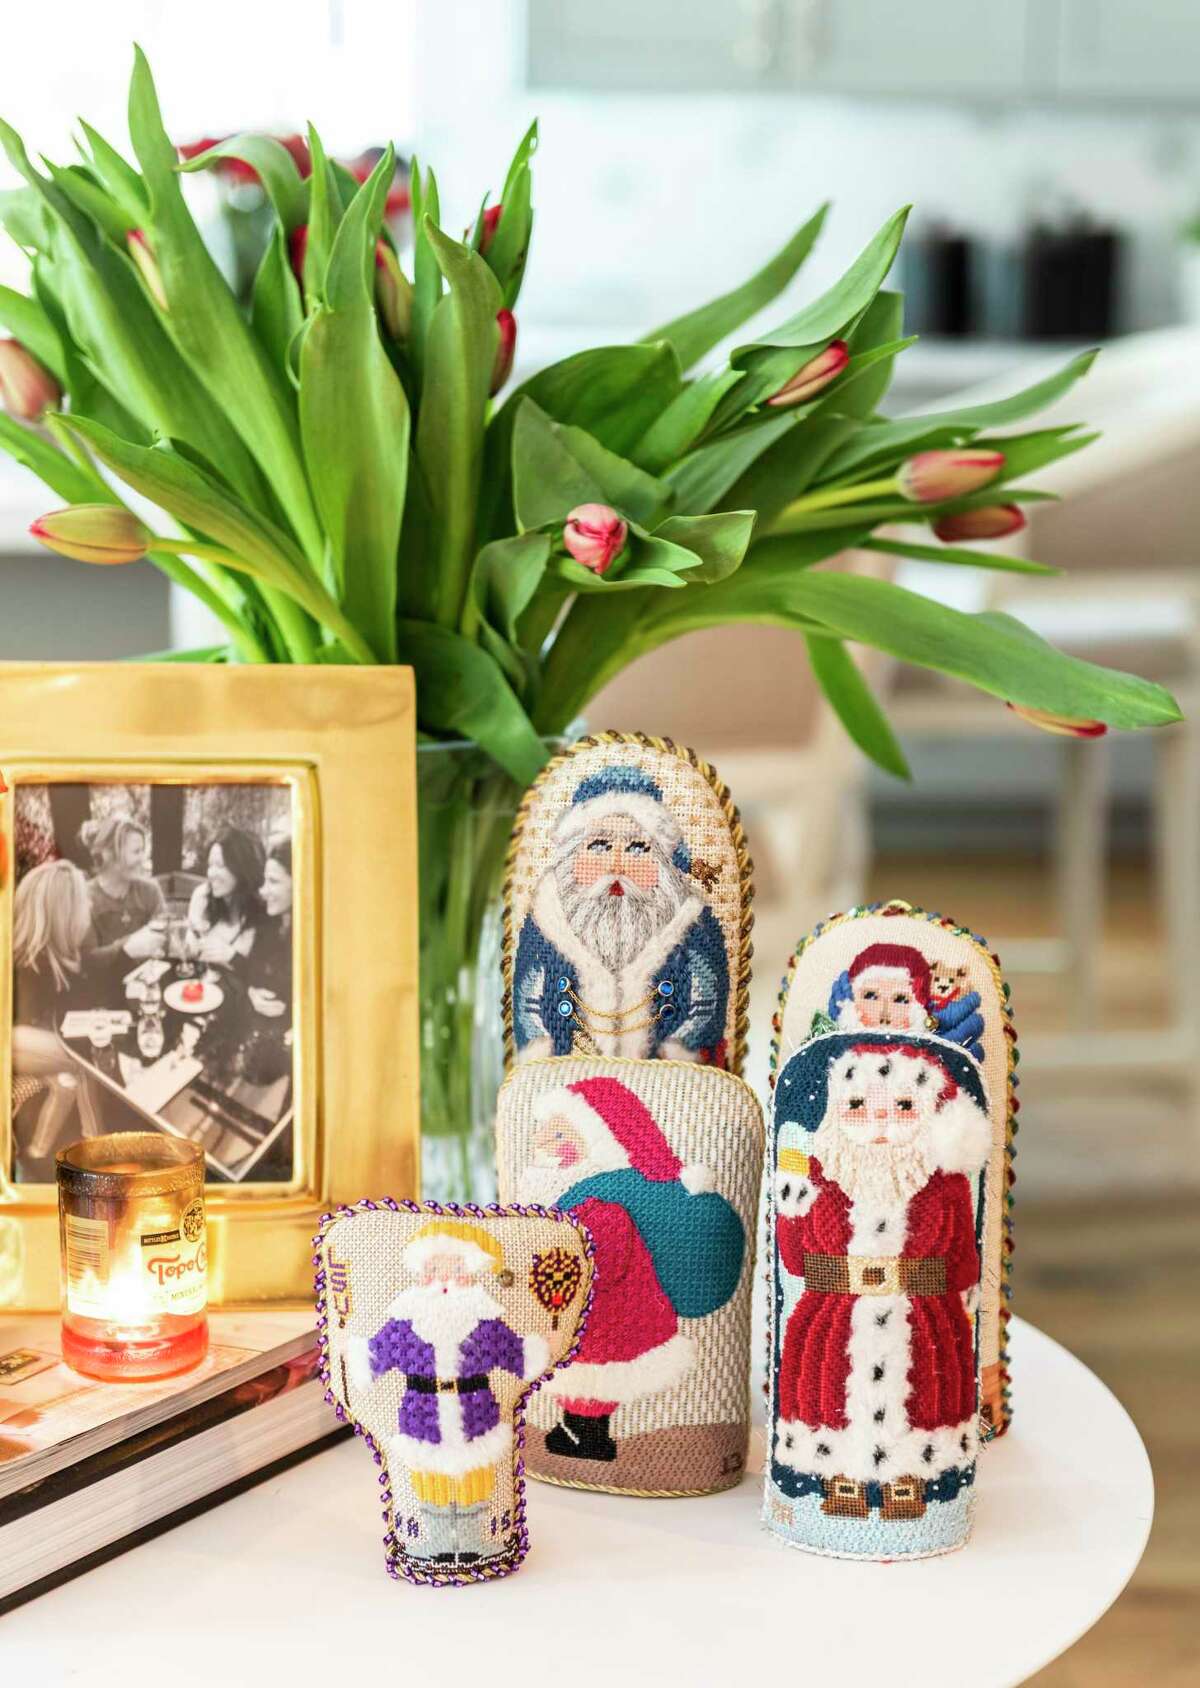 These cute needlepoint figures sit on a side table.